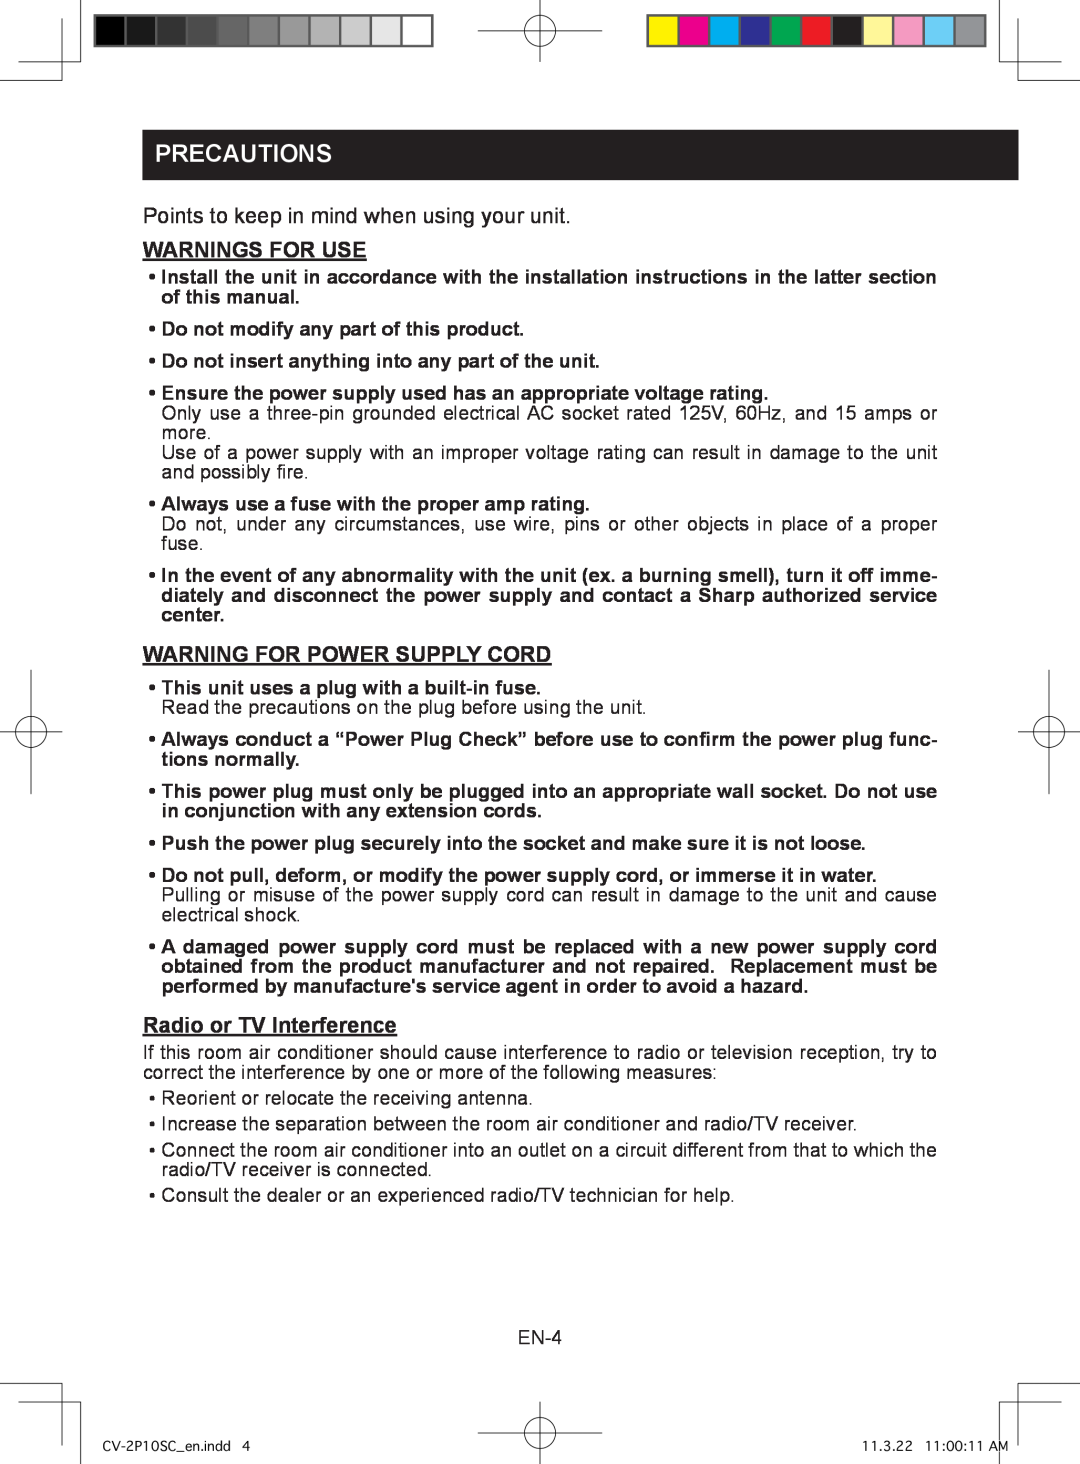 Sharp CV-2P10SC operation manual Precautions, Warnings For Use, Warning For Power Supply Cord, Radio or TV Interference 